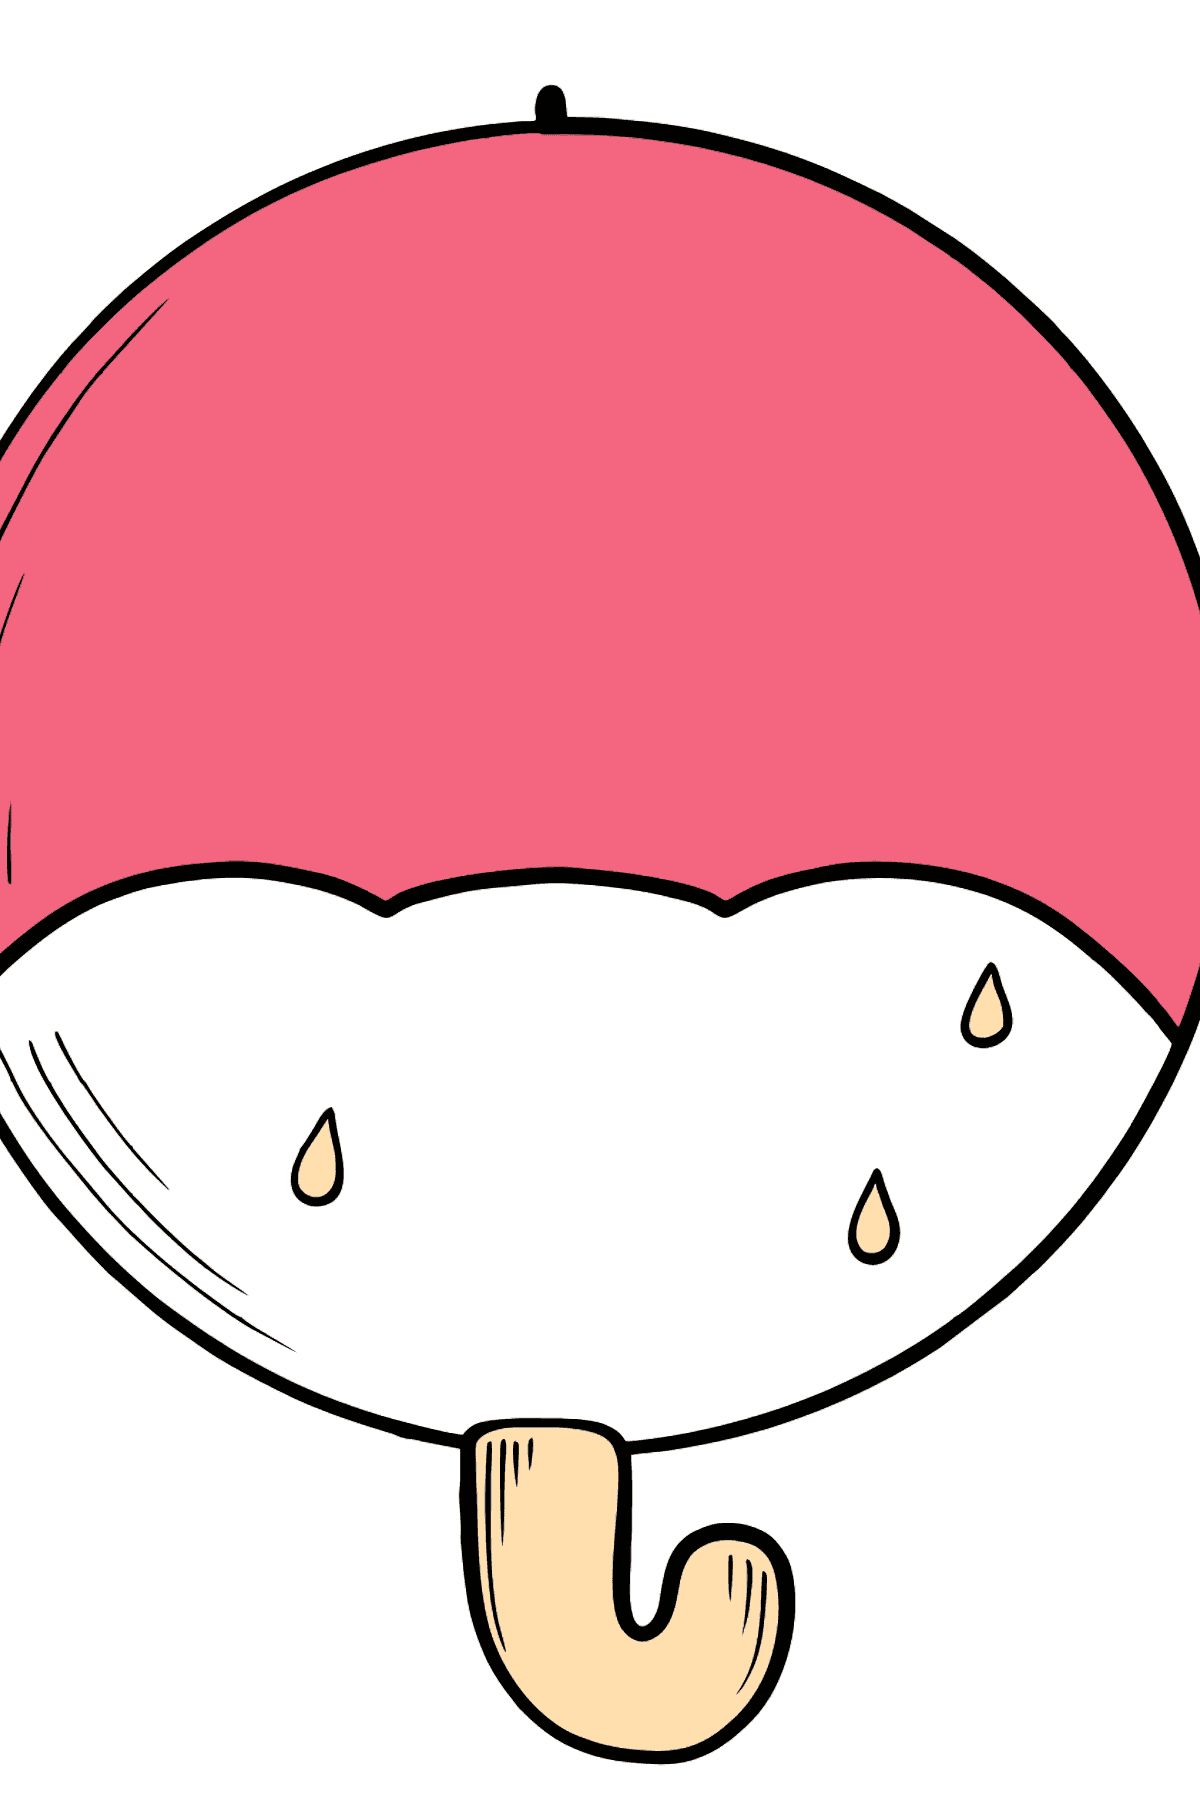 Ice Cream Popsicle with Glaze coloring page - Coloring Pages for Kids